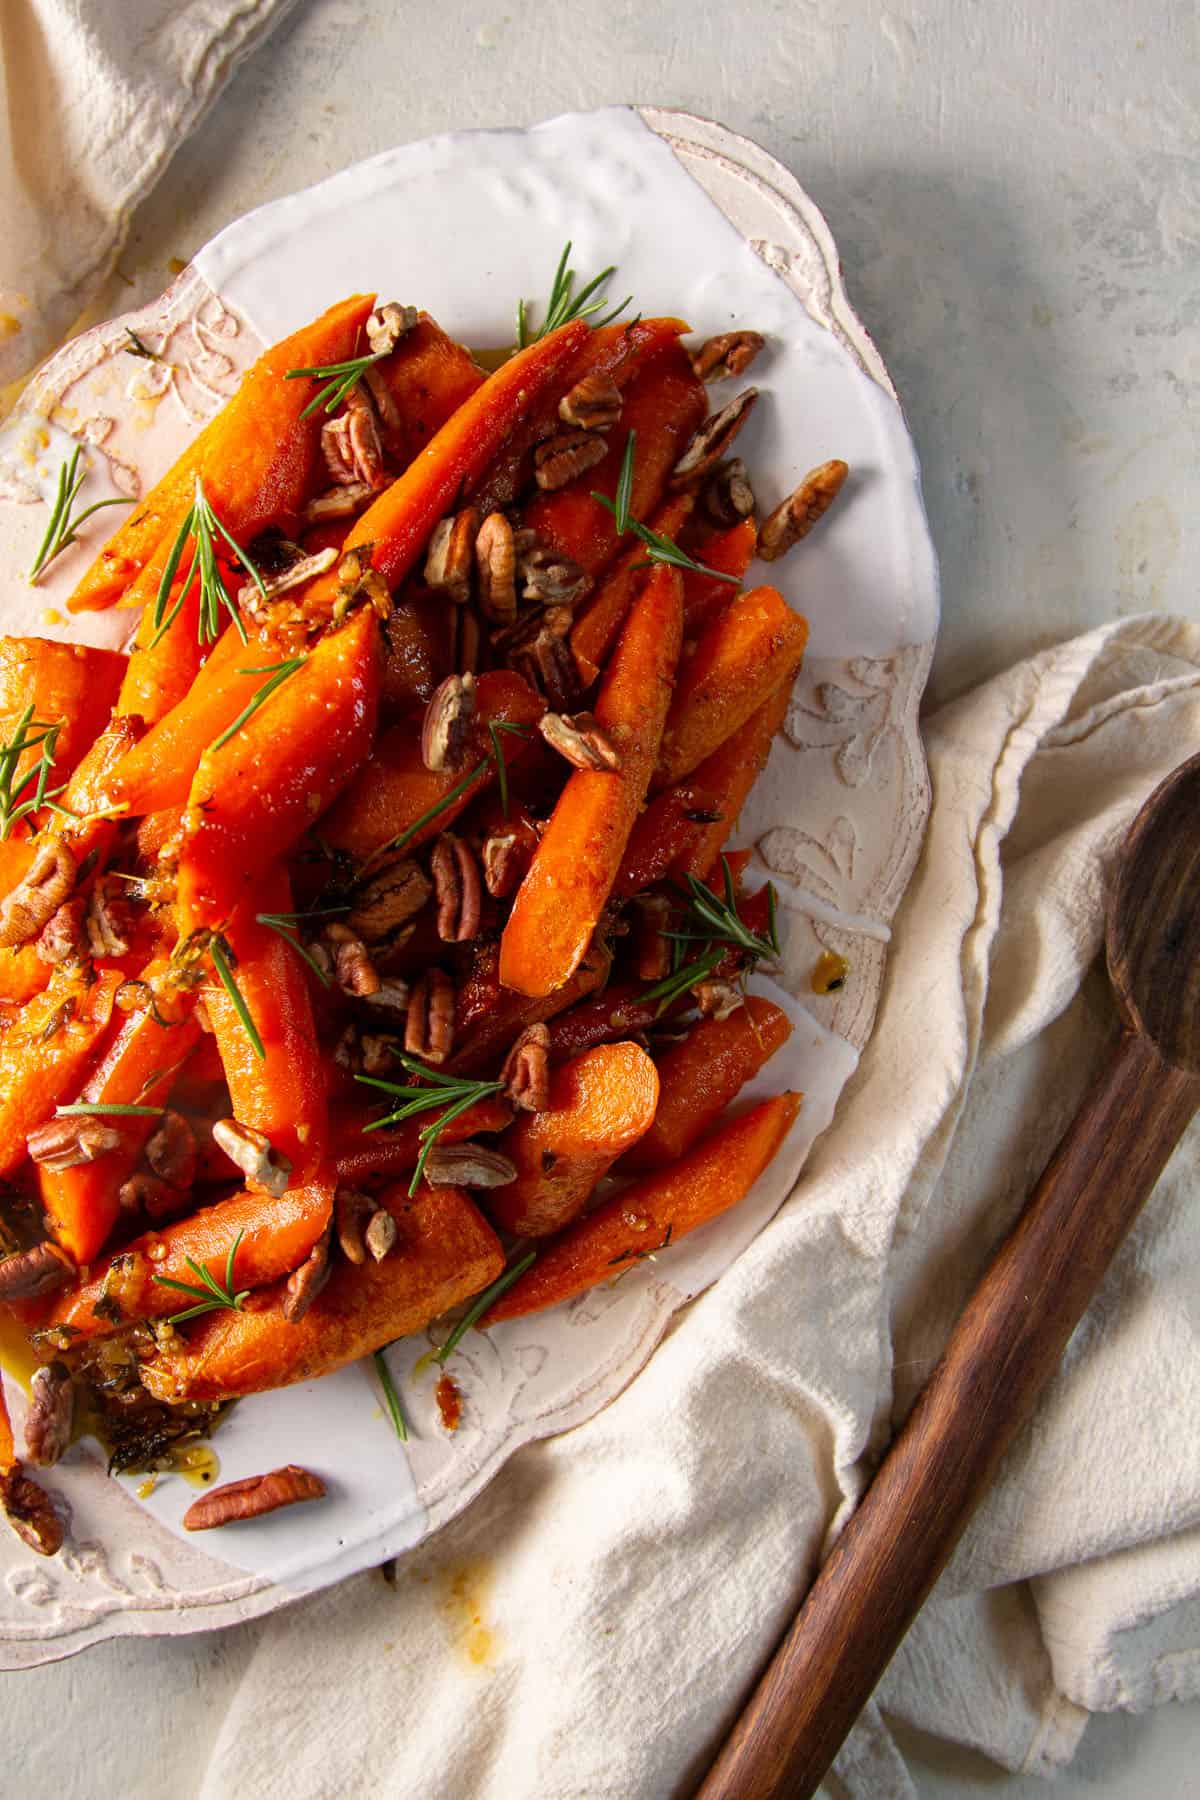 Oven-roasted carrots on a white serving platter